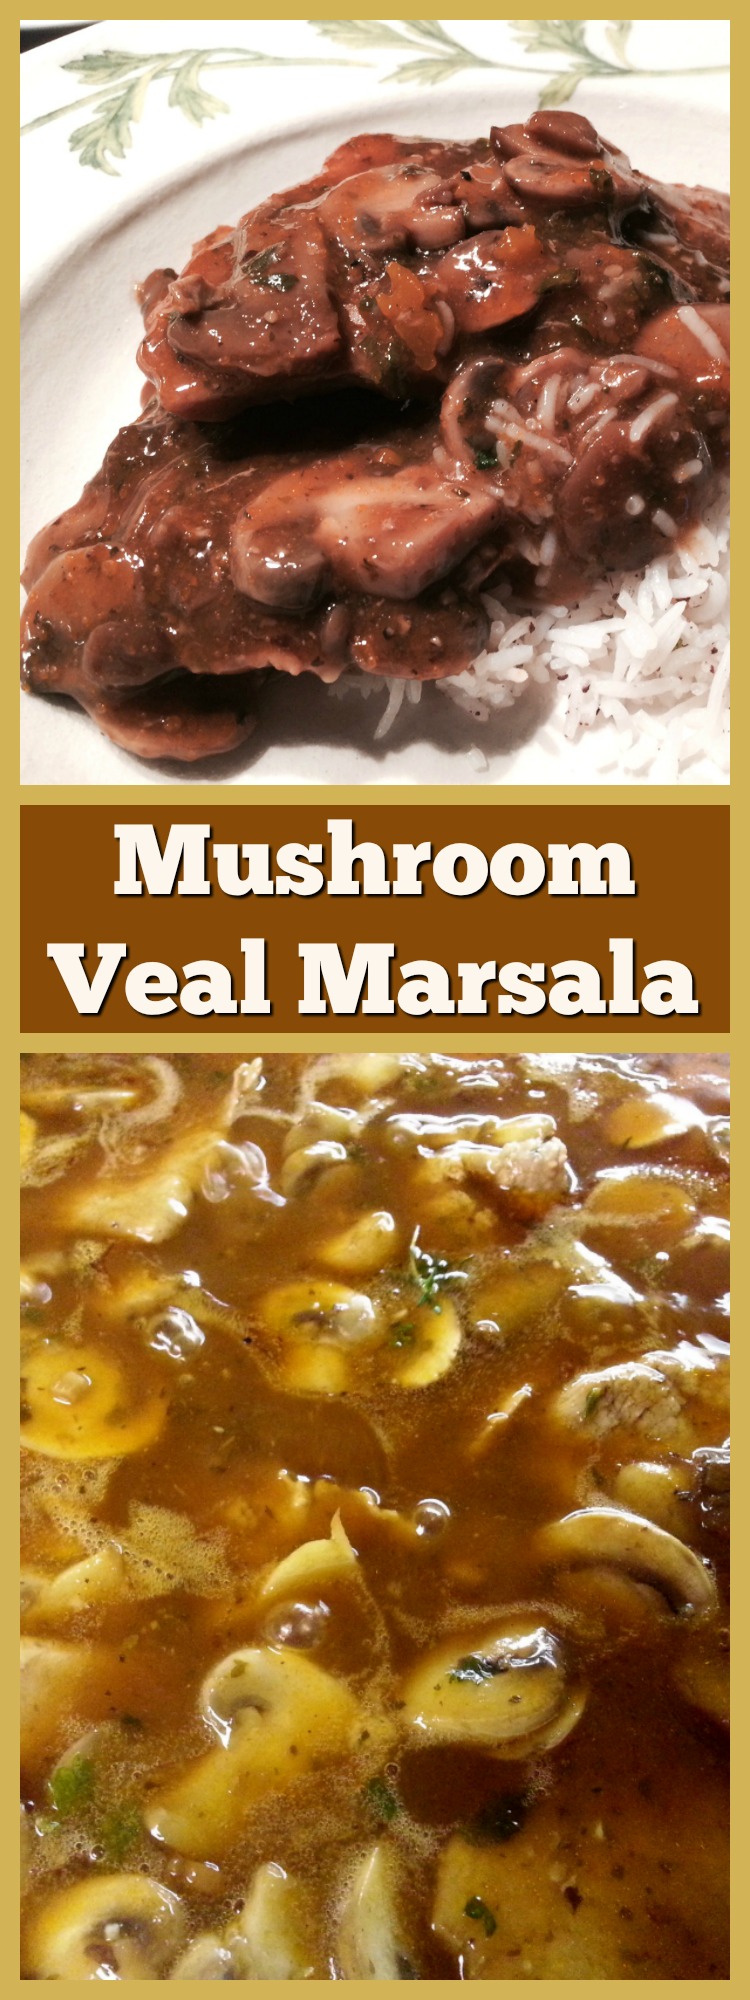 Make Mushroom Veal Marsala for dinner tonight. You can use chicken but if you can find some veal...try it with veal for an incomparable taste experience.